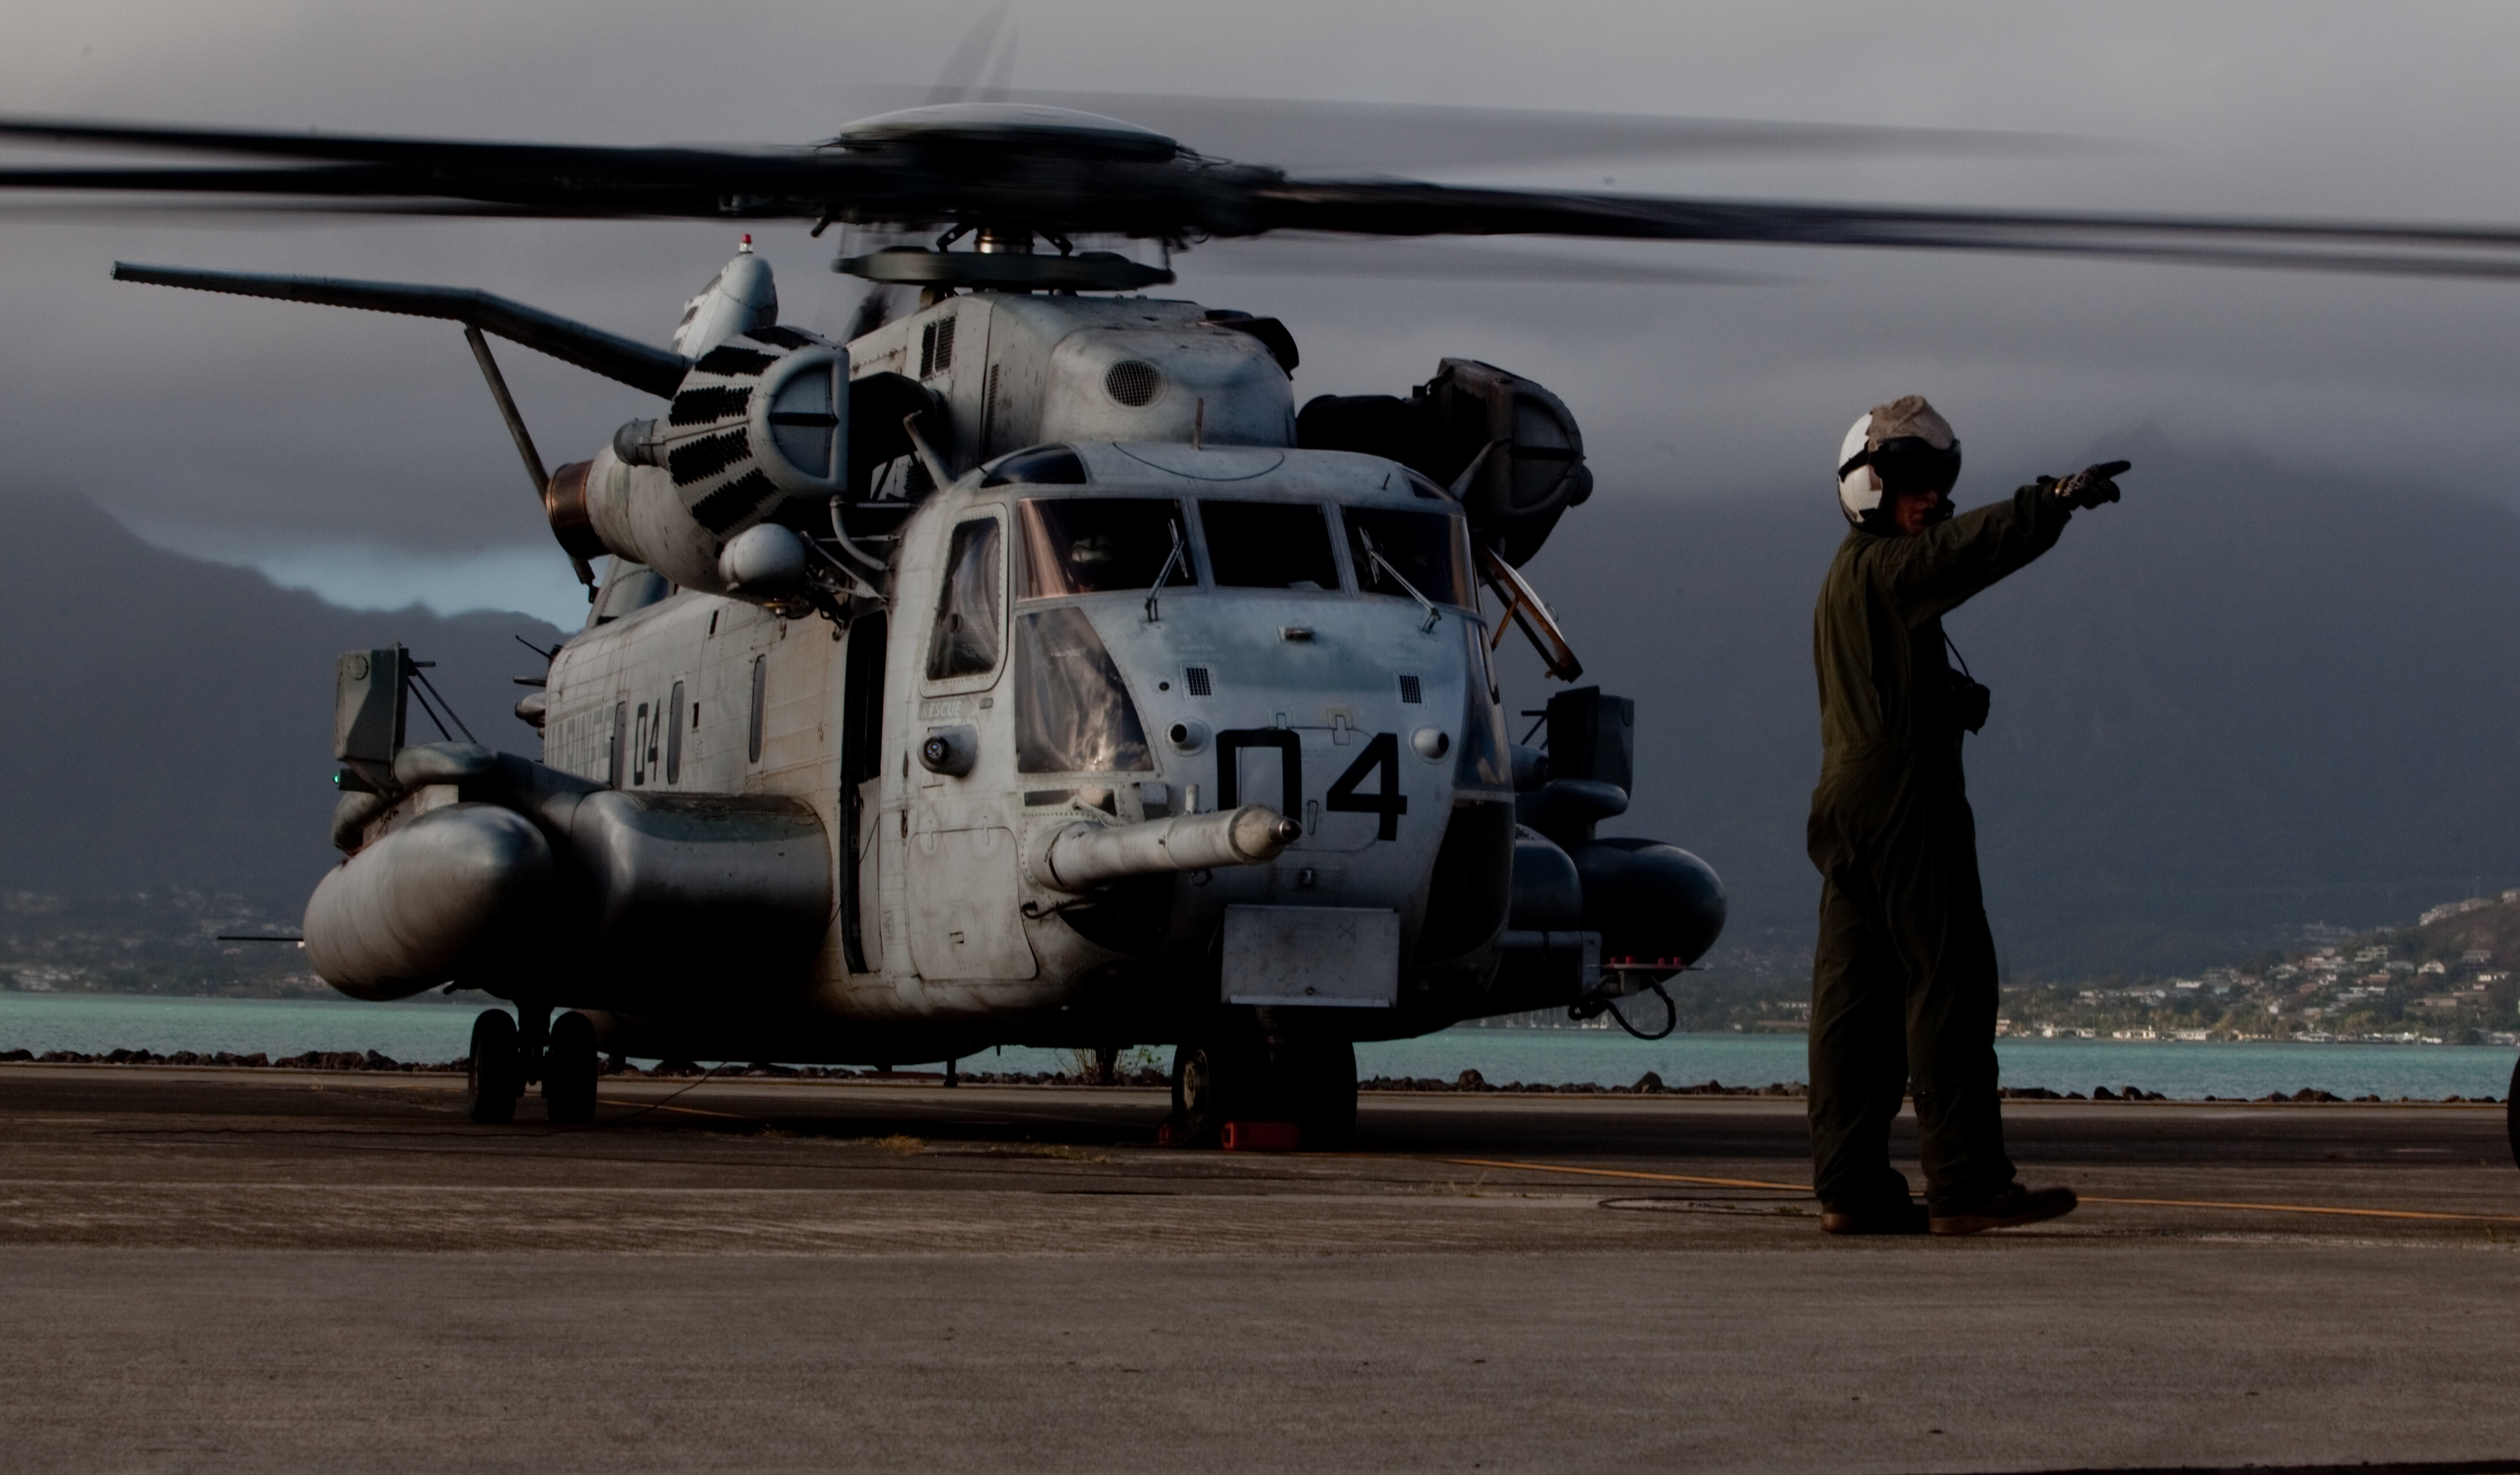 A Marine with Marine Heavy Helicopter Squadron 463 taxis a CH-53E Super Stallion onto the flight line at Marine Corps Air Station, Kaneohe Bay on Feb. 21, 2012. US Marine Corps photo.